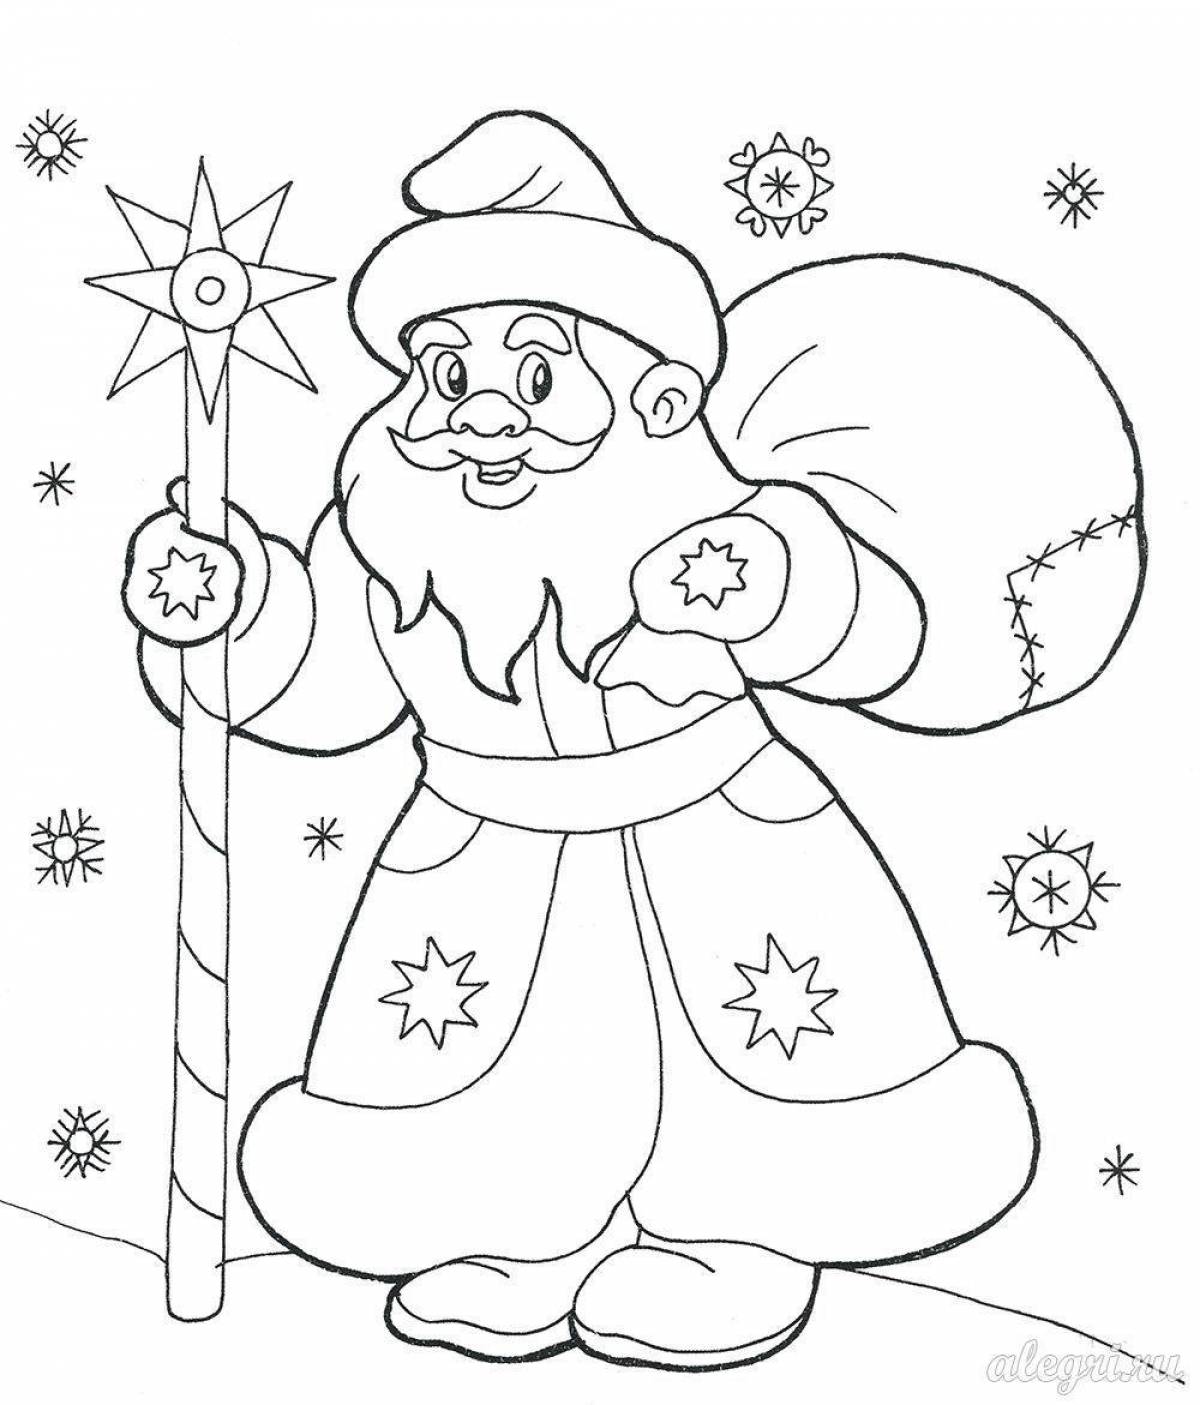 Exciting coloring of santa claus